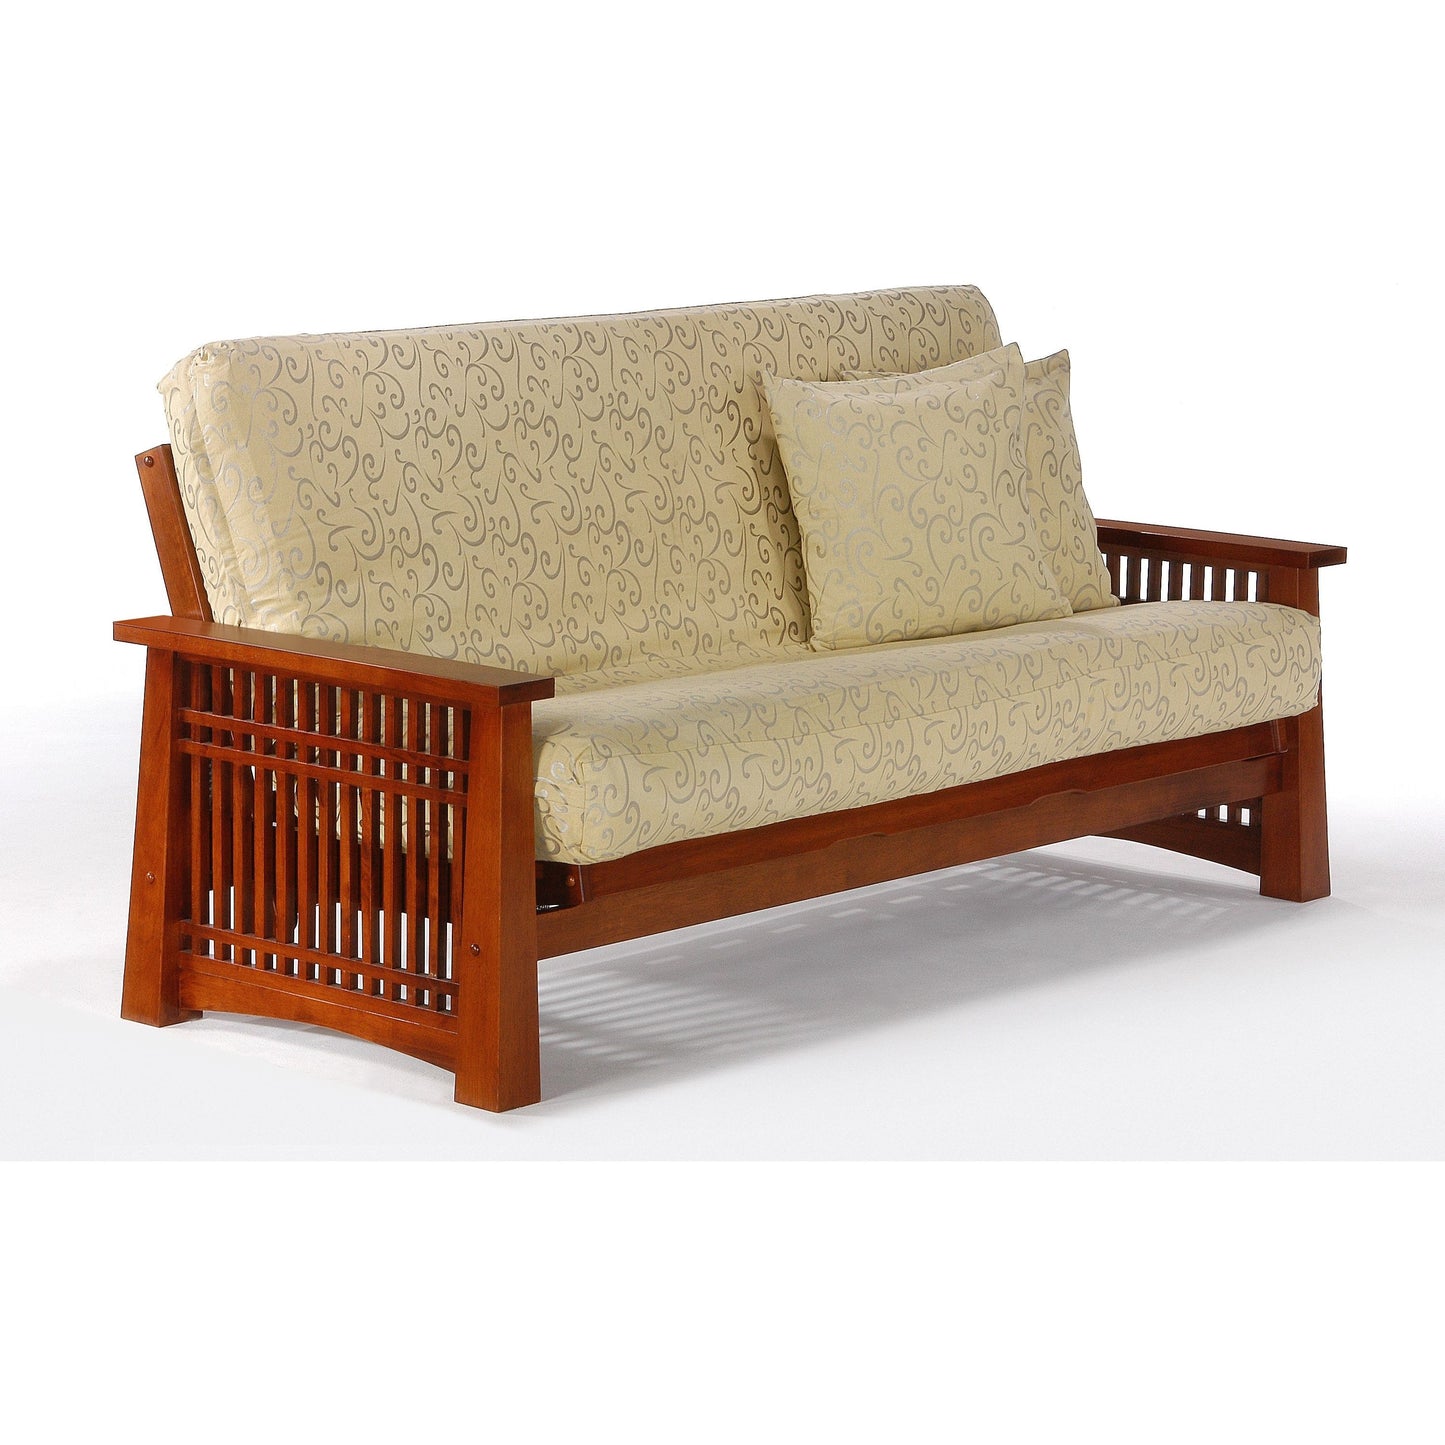 Night and Day Solstice Queen Futon Frame in black walnut finish Cherry